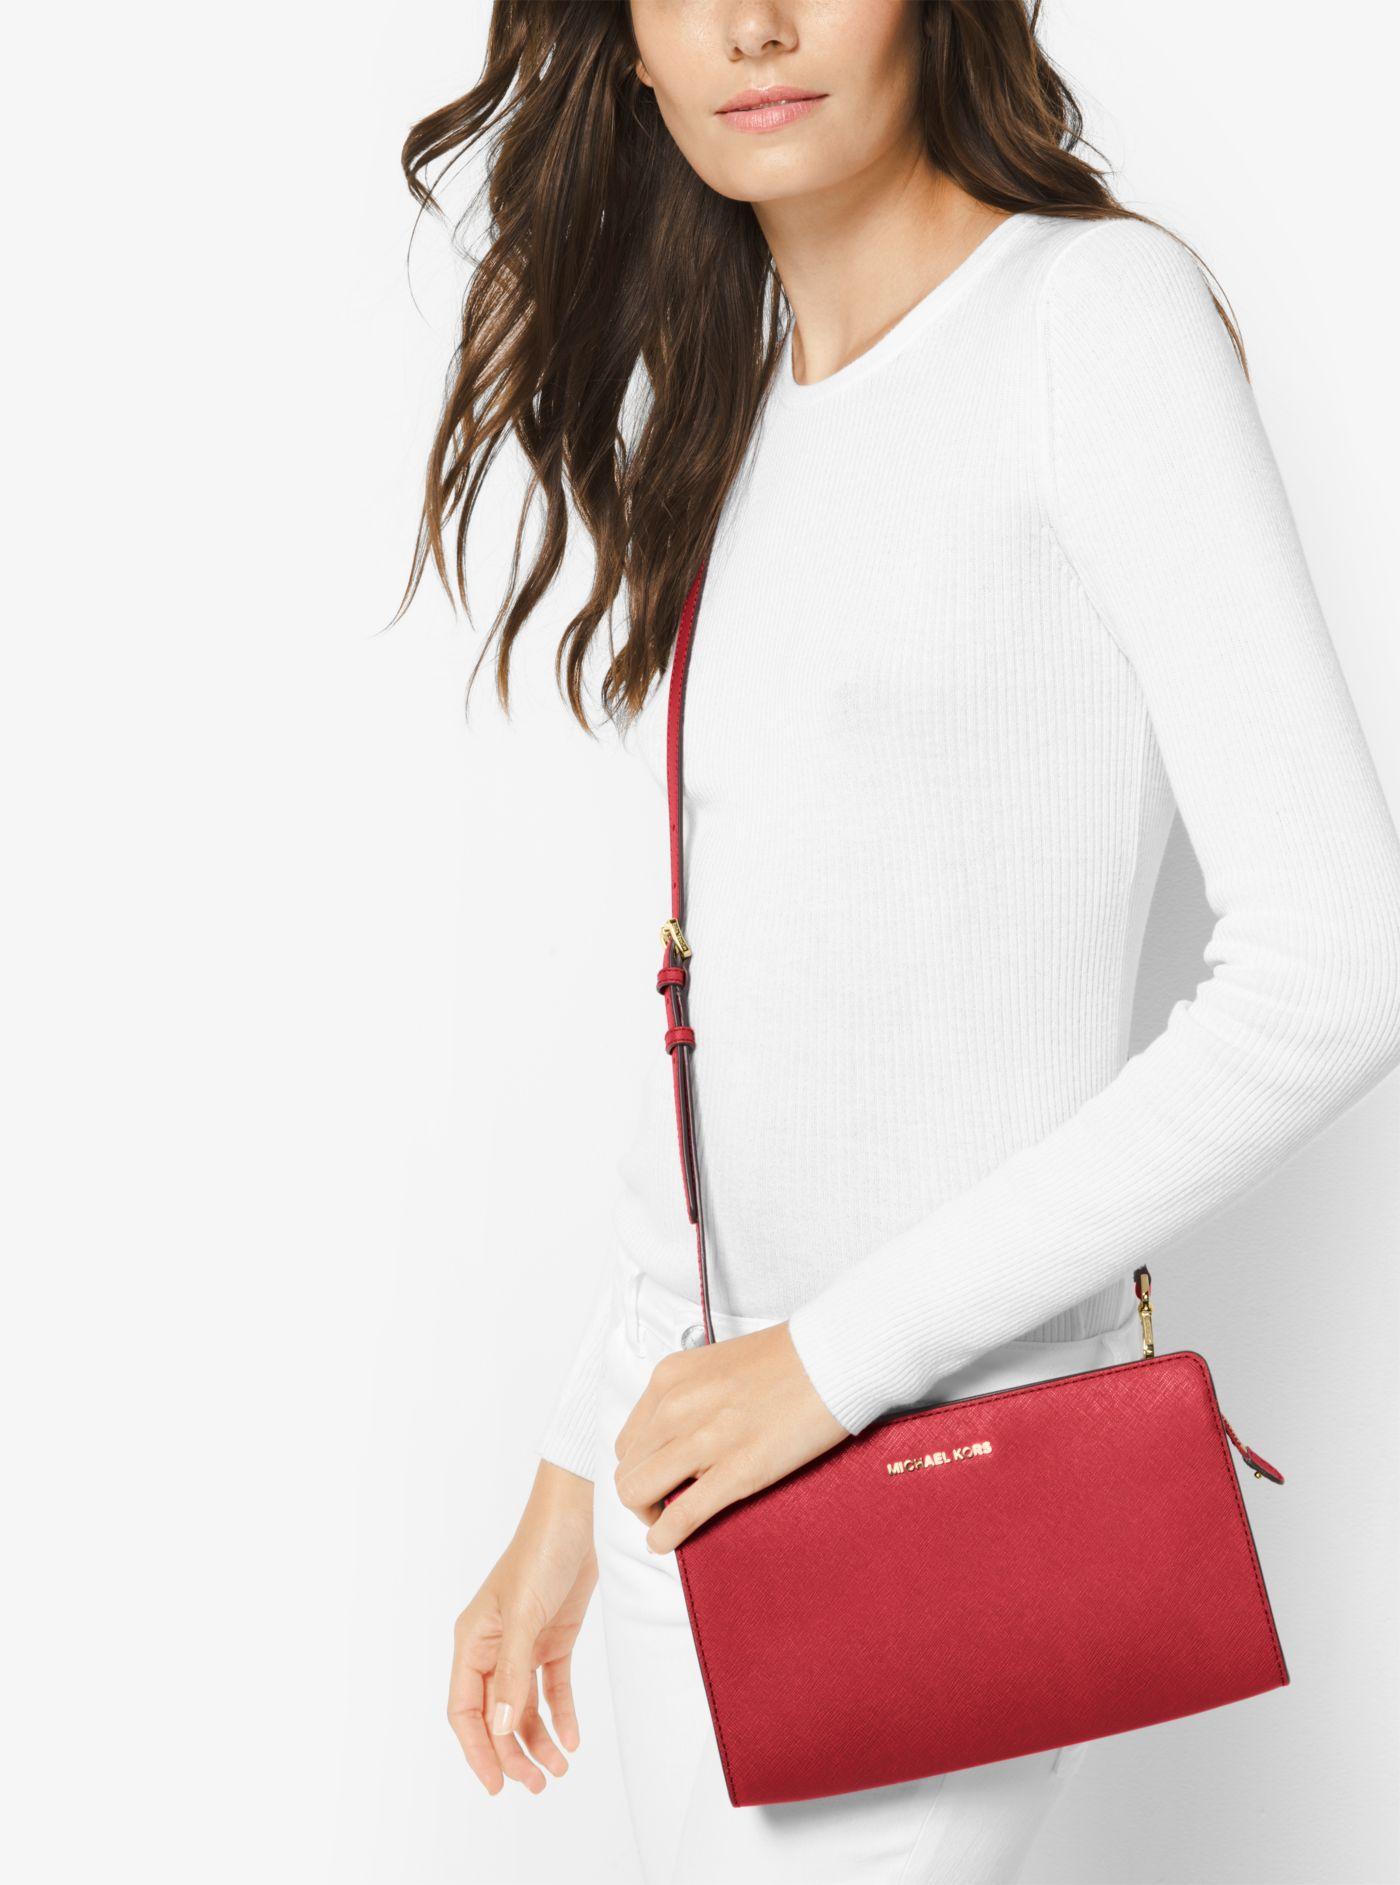 Michael Kors Jet Set Large Saffiano Leather Convertible Crossbody Bag in Bright Red (Red) -